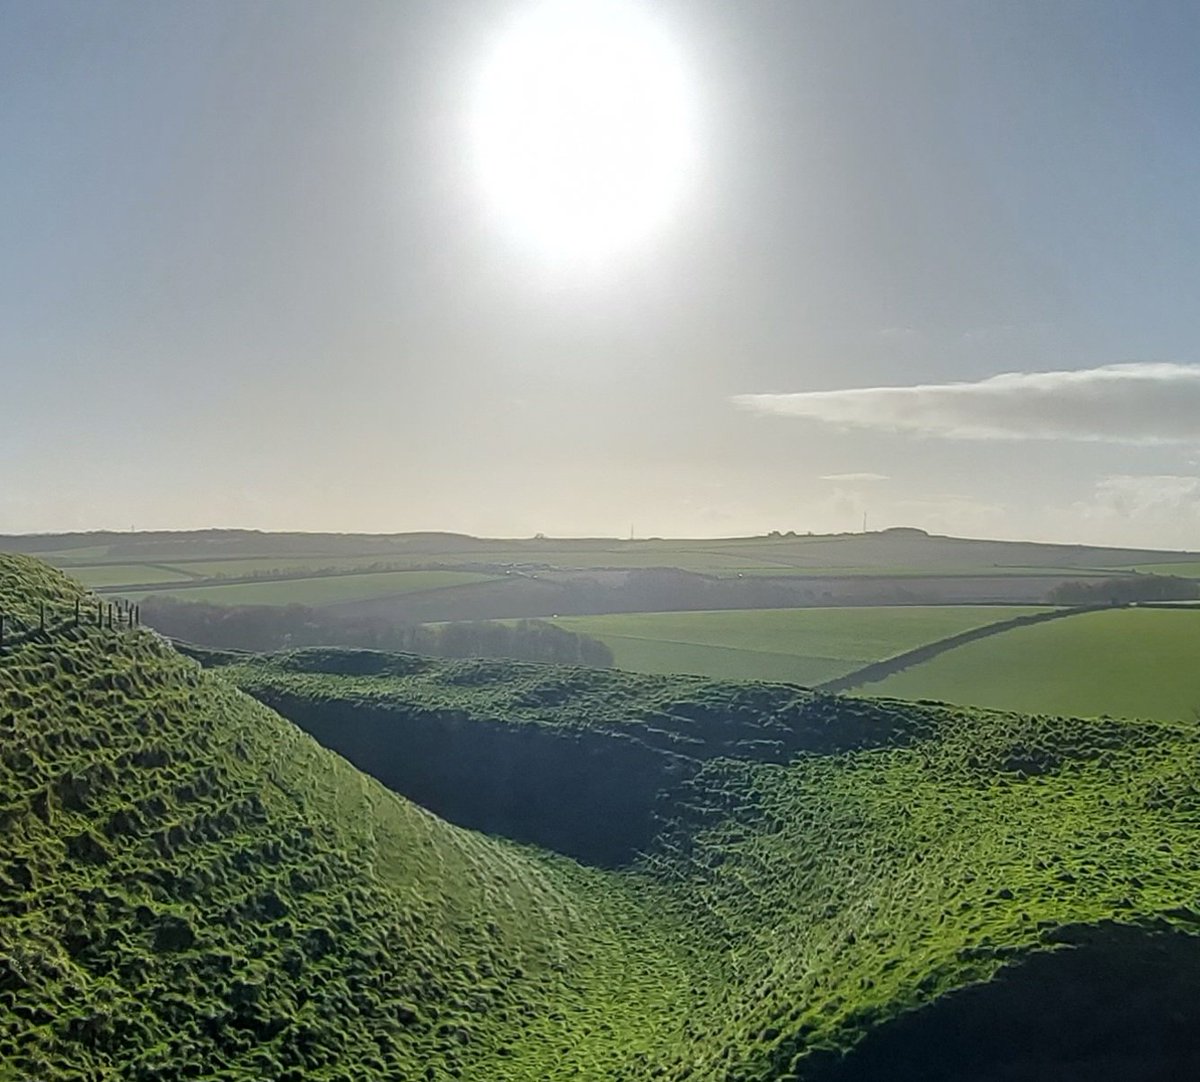 In Dorset this morning, exploring the formidable Neolithic earthworks of Maiden Castle for #HillfortWednesday